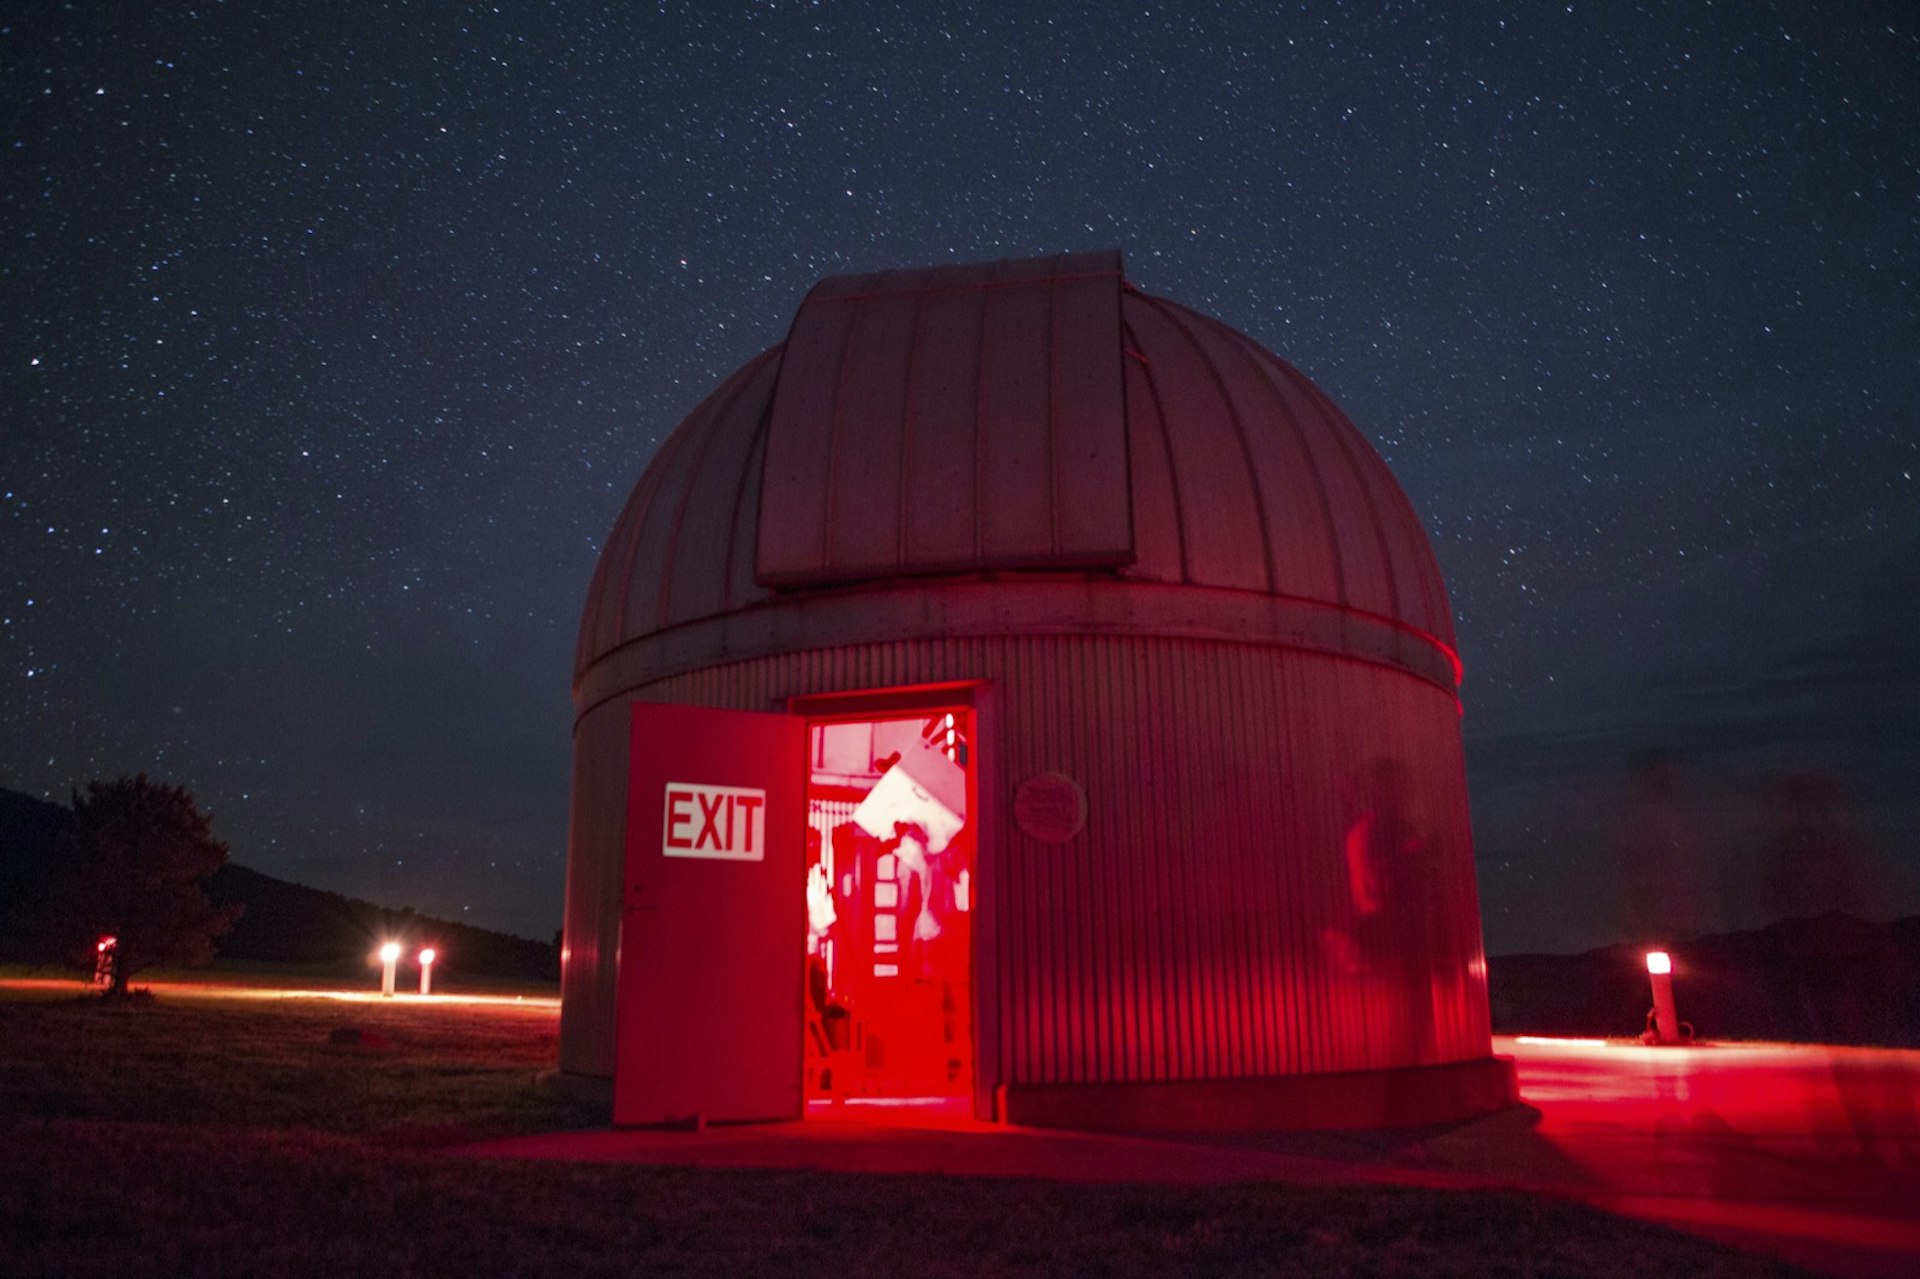 A domed telescope hub at night, lit by red light with the door open, revealing a large 'exit' sign and a blurry interior; Apollo anniversary experiences